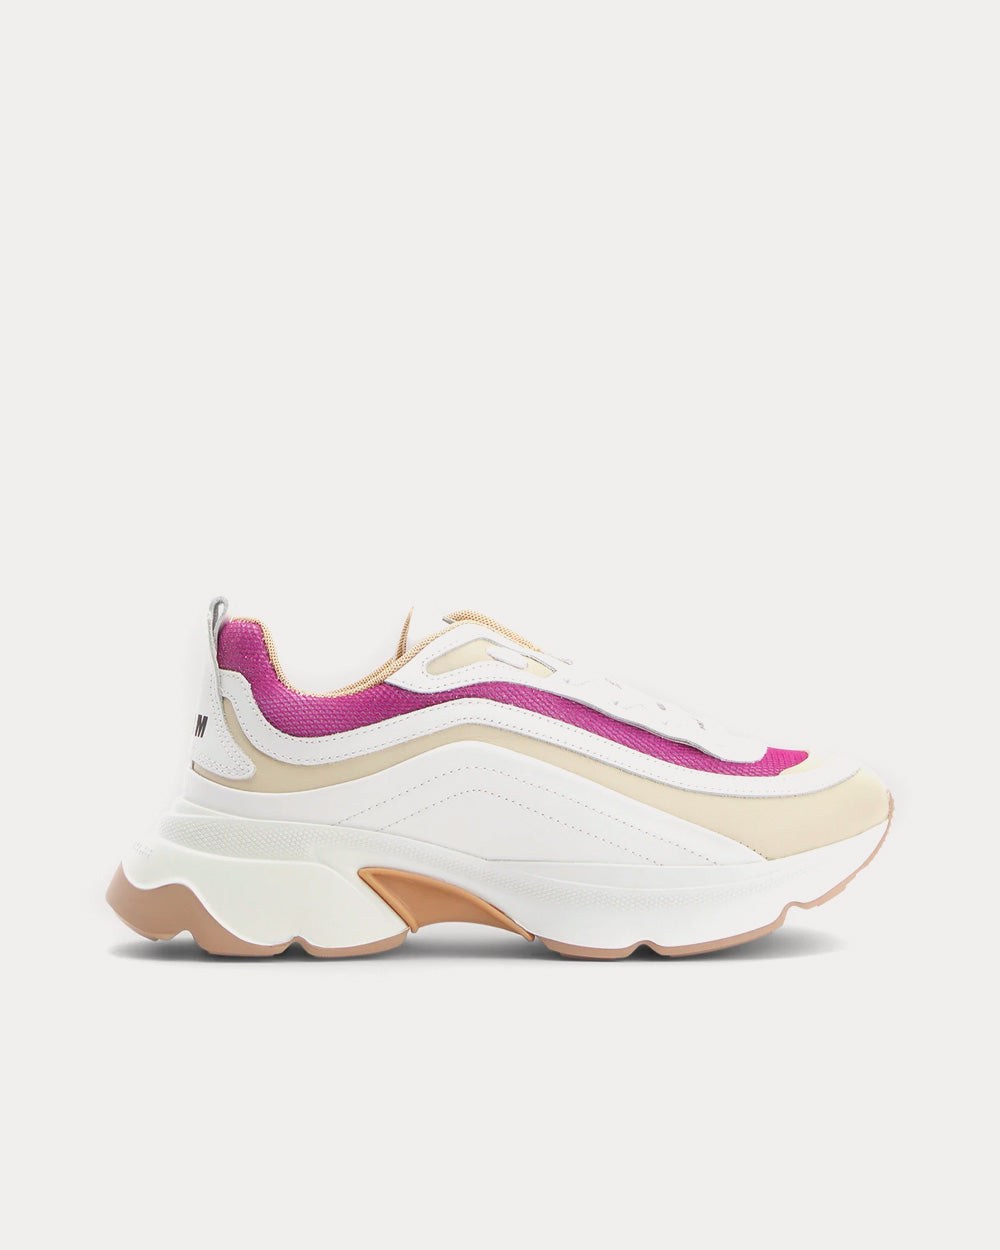 MSGM - Minimal Runner Chunky Sole Fuchsia Low Top Sneakers